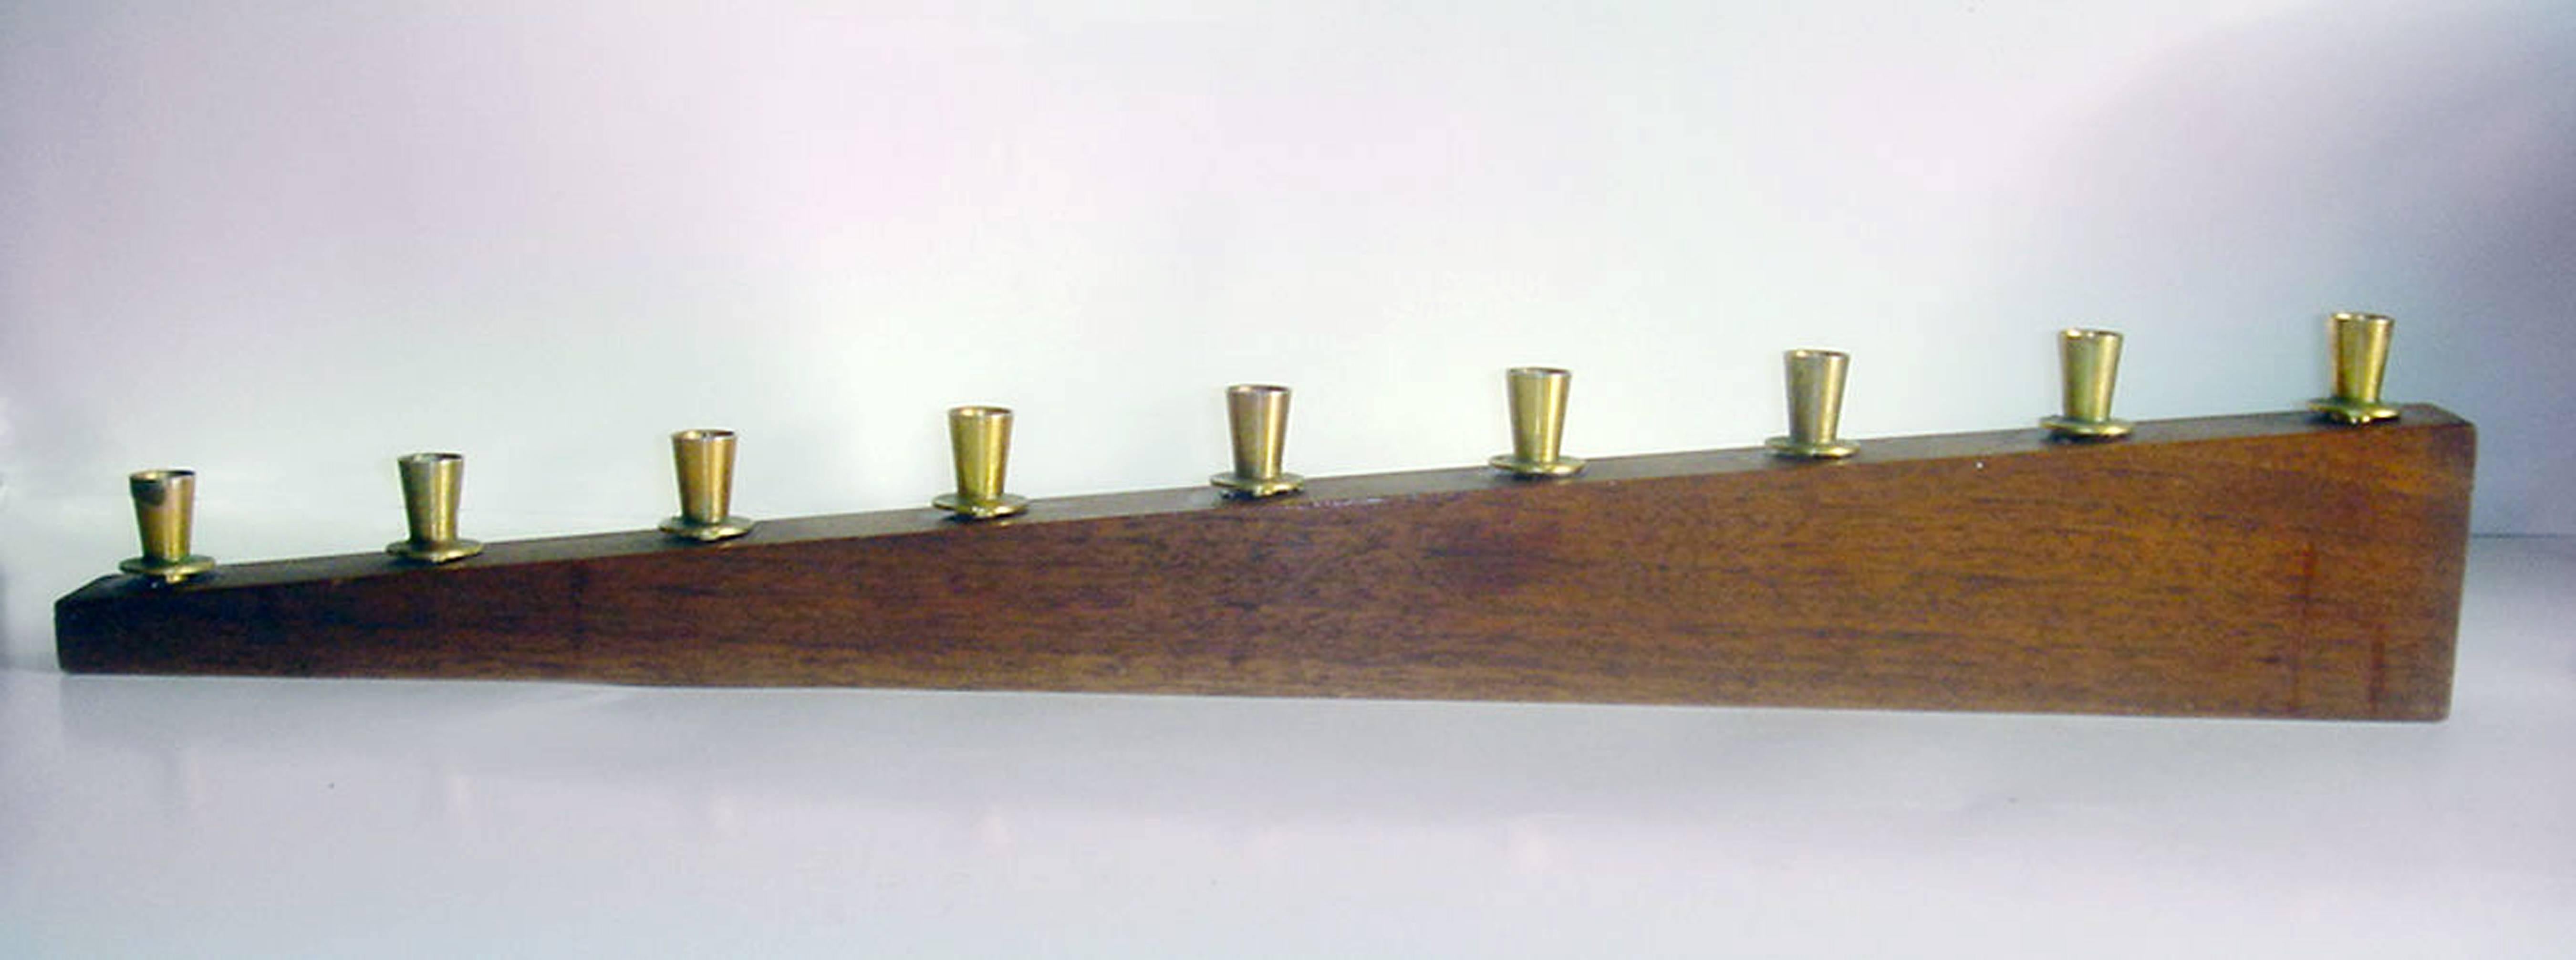 Paul Evans Hanukkah Menorah, 
For Raymor,
1955.

The menorah is made from walnut with brass candleholders. Paul Evan's menorahs were never marked.

The entry in the Raymor catalogue reads, 